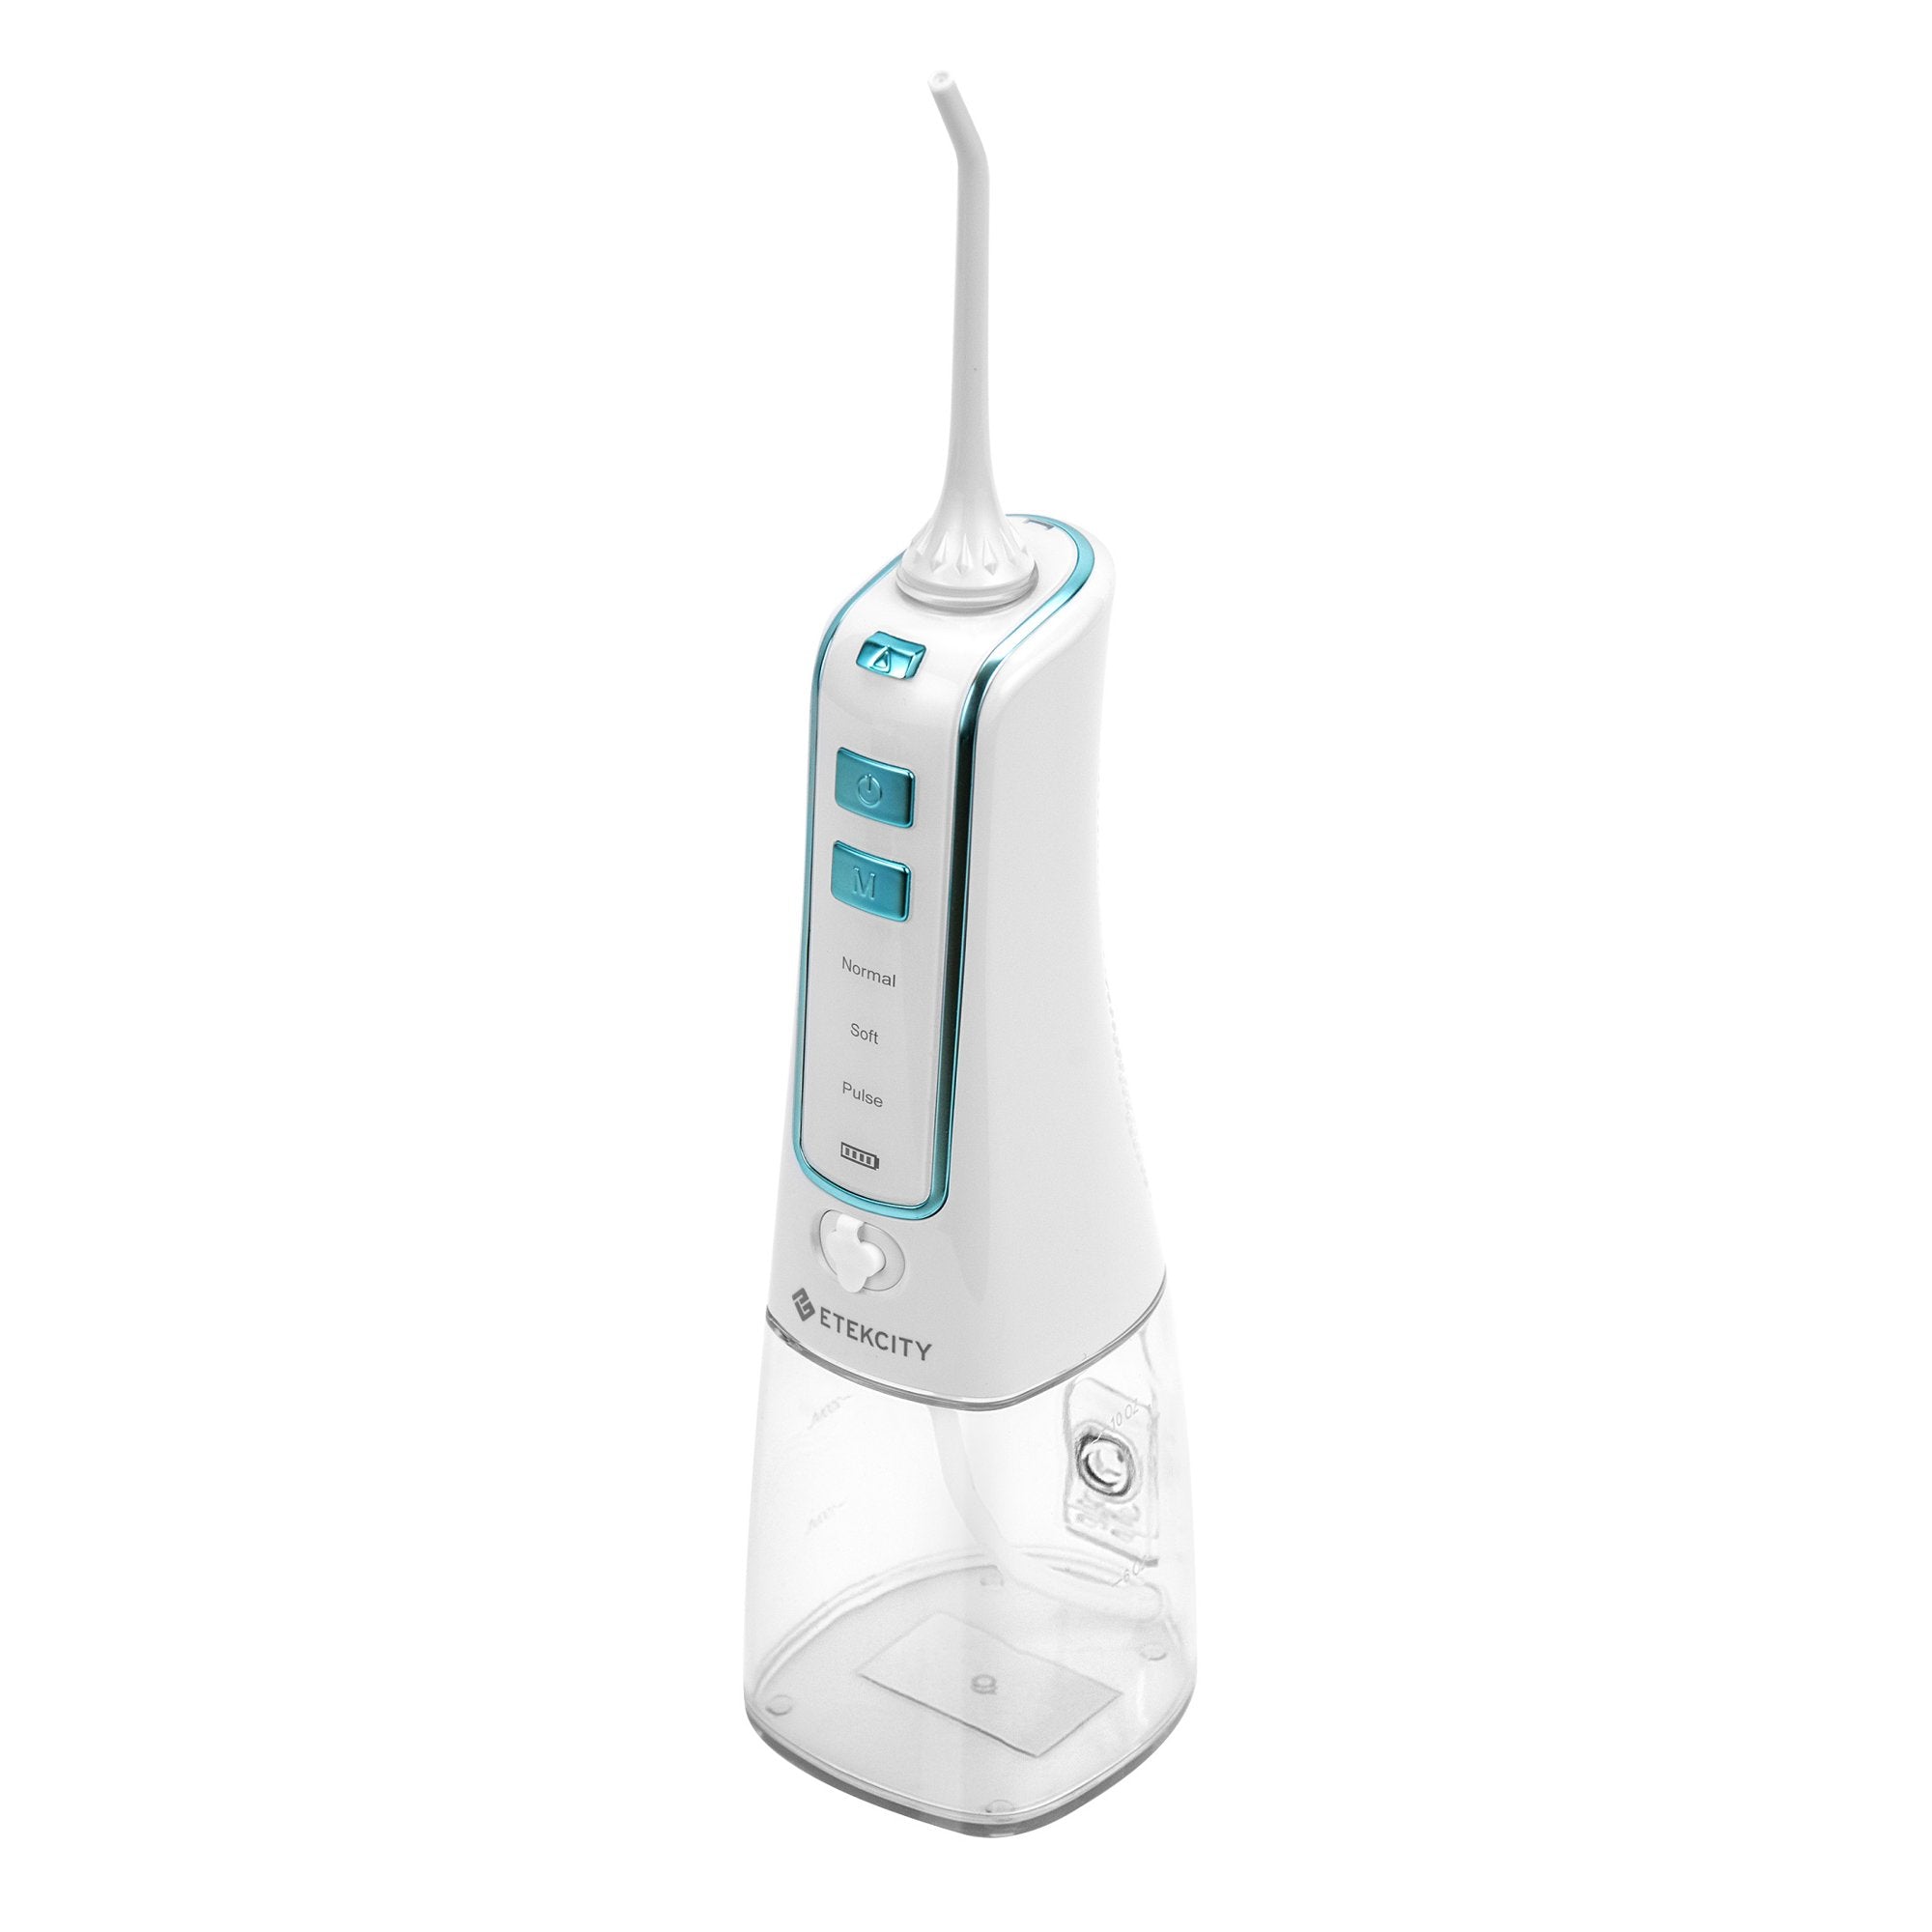 Etekcity Cordless Water Flosser, USB Rechargeable Dental Oral Irrigator, 300 ml Portable Waterproof Teeth Cleaner for Home and Travel - image 3 of 5